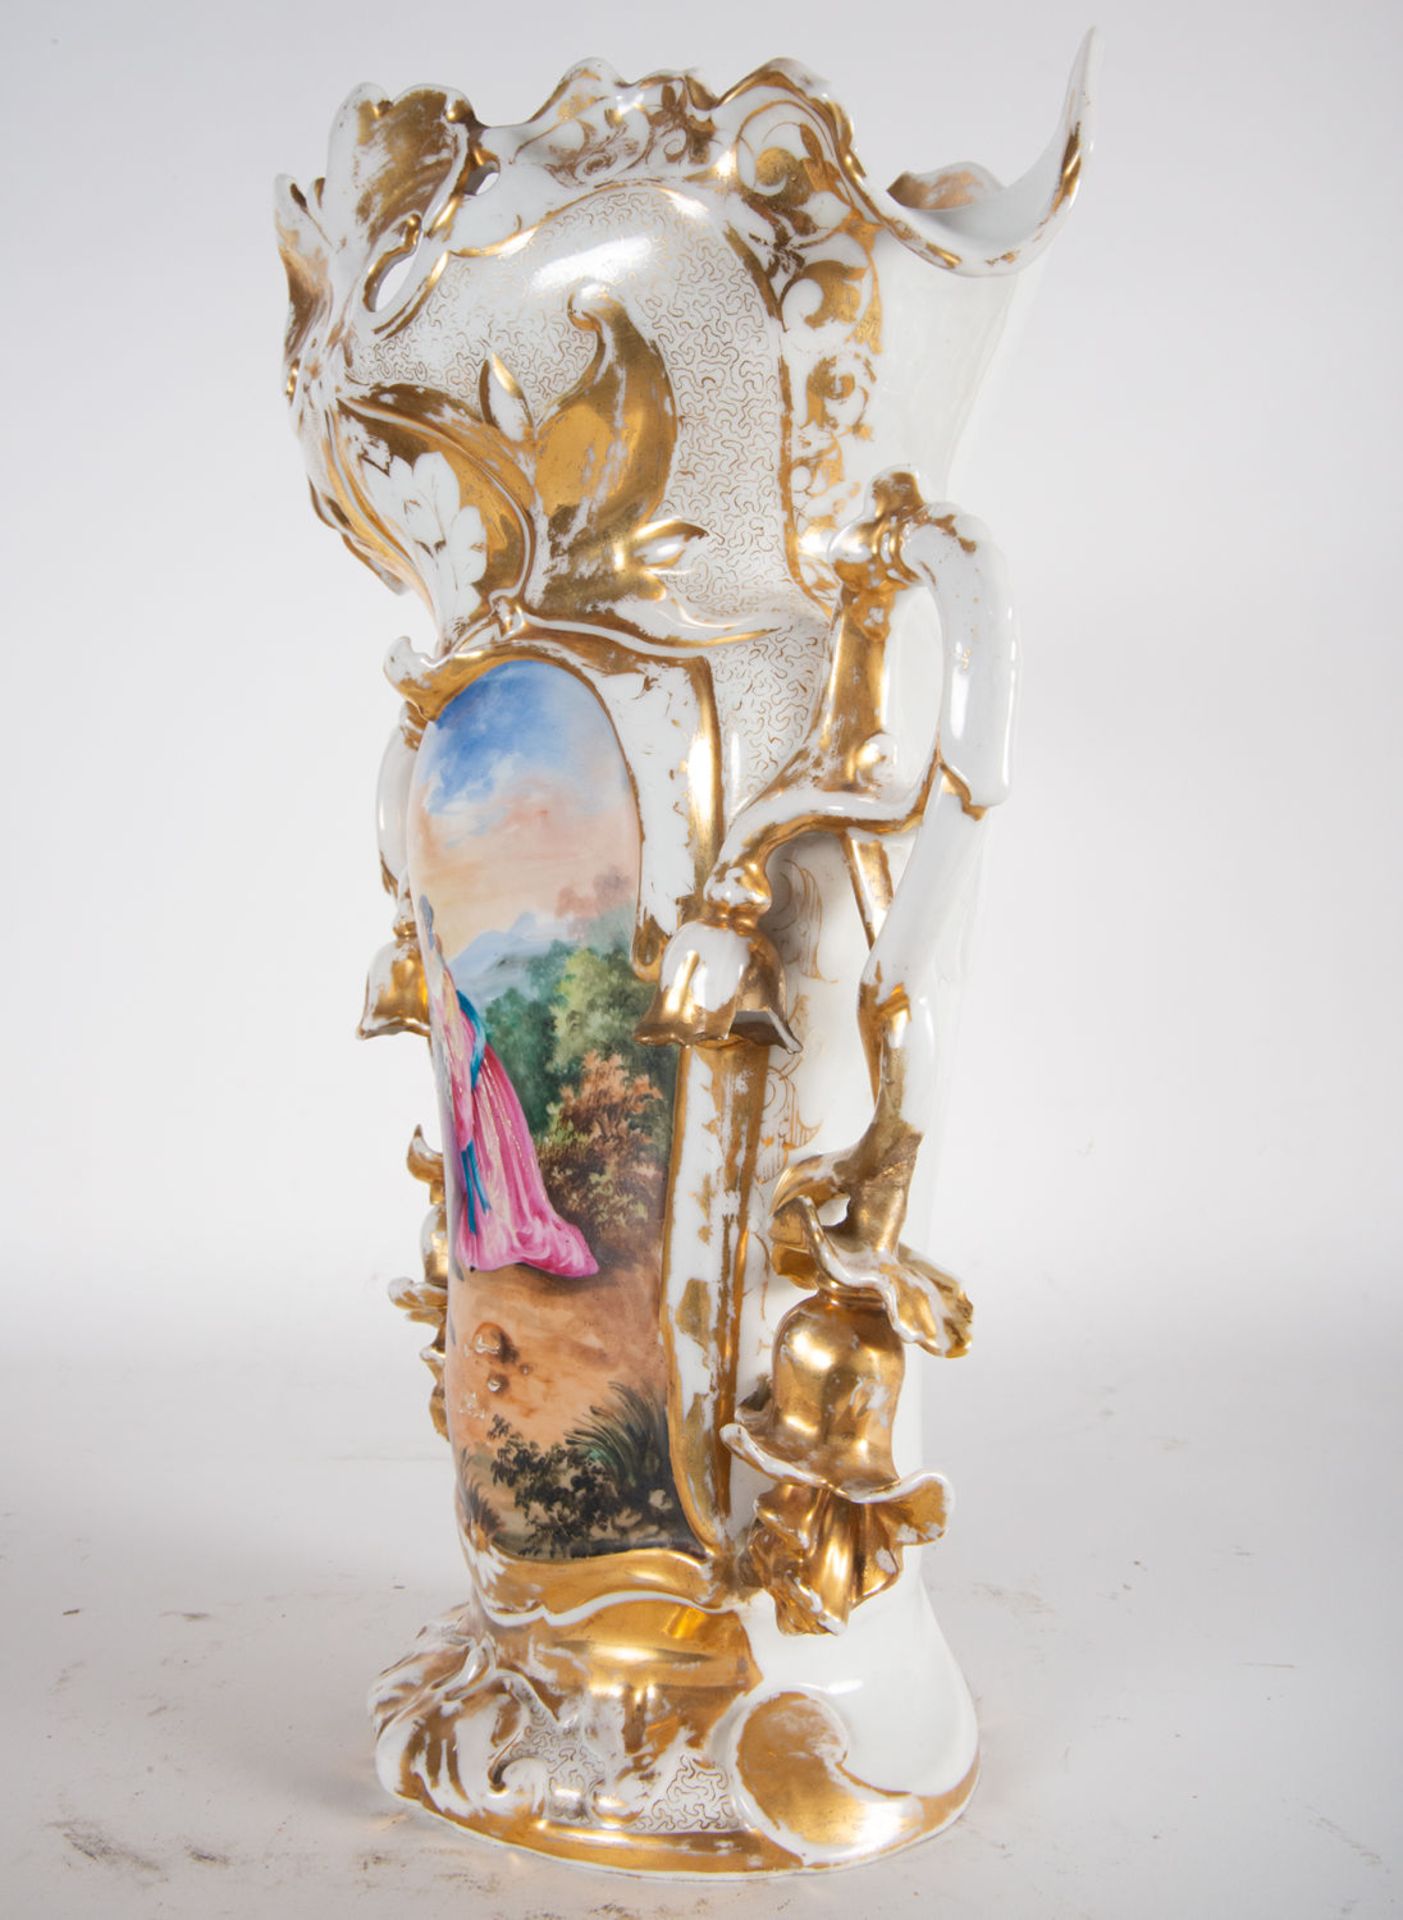 Pair of Elizabethan Vases in enameled and polychrome porcelain, 19th century - Image 8 of 10